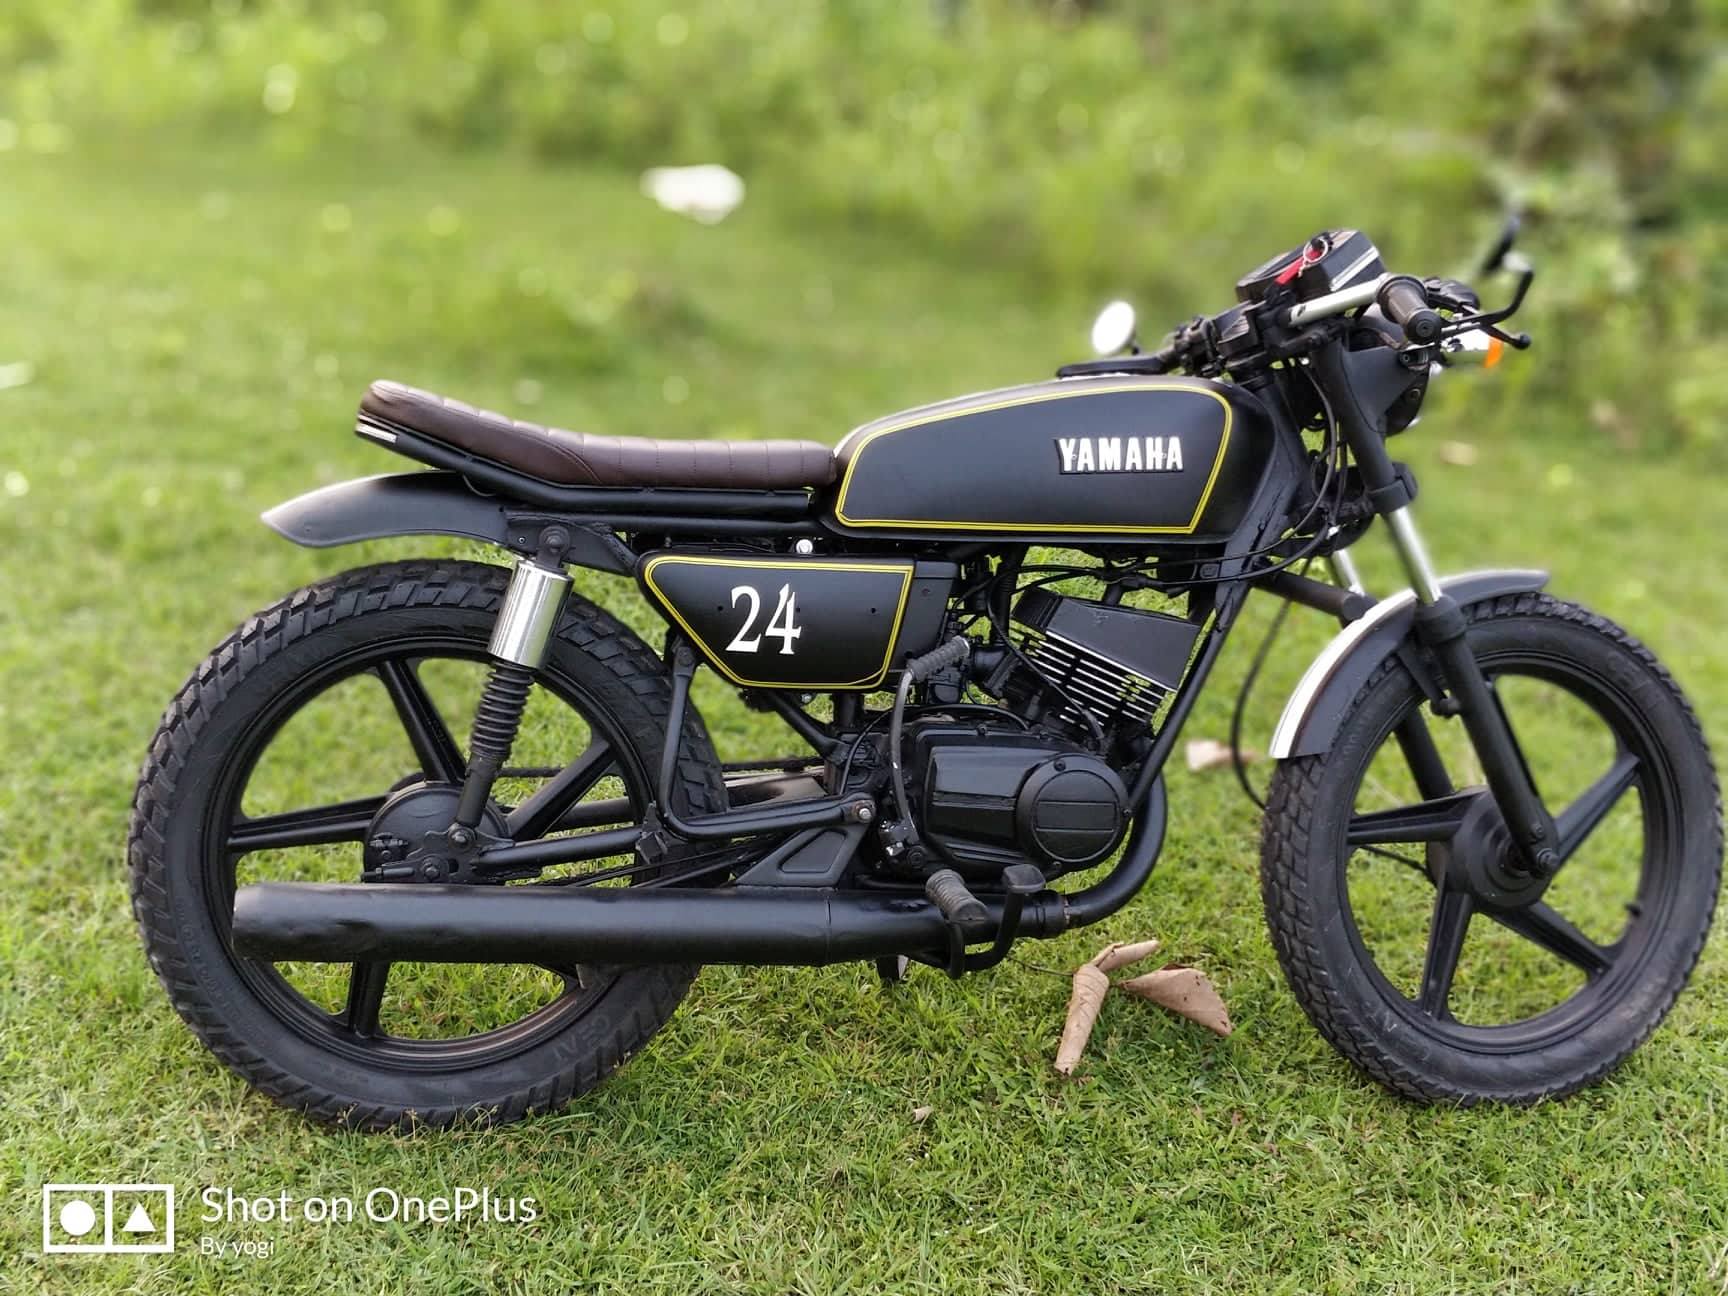 Top 10 Modified Yamaha RX100 Motorcycles in India - Must Check! - snap